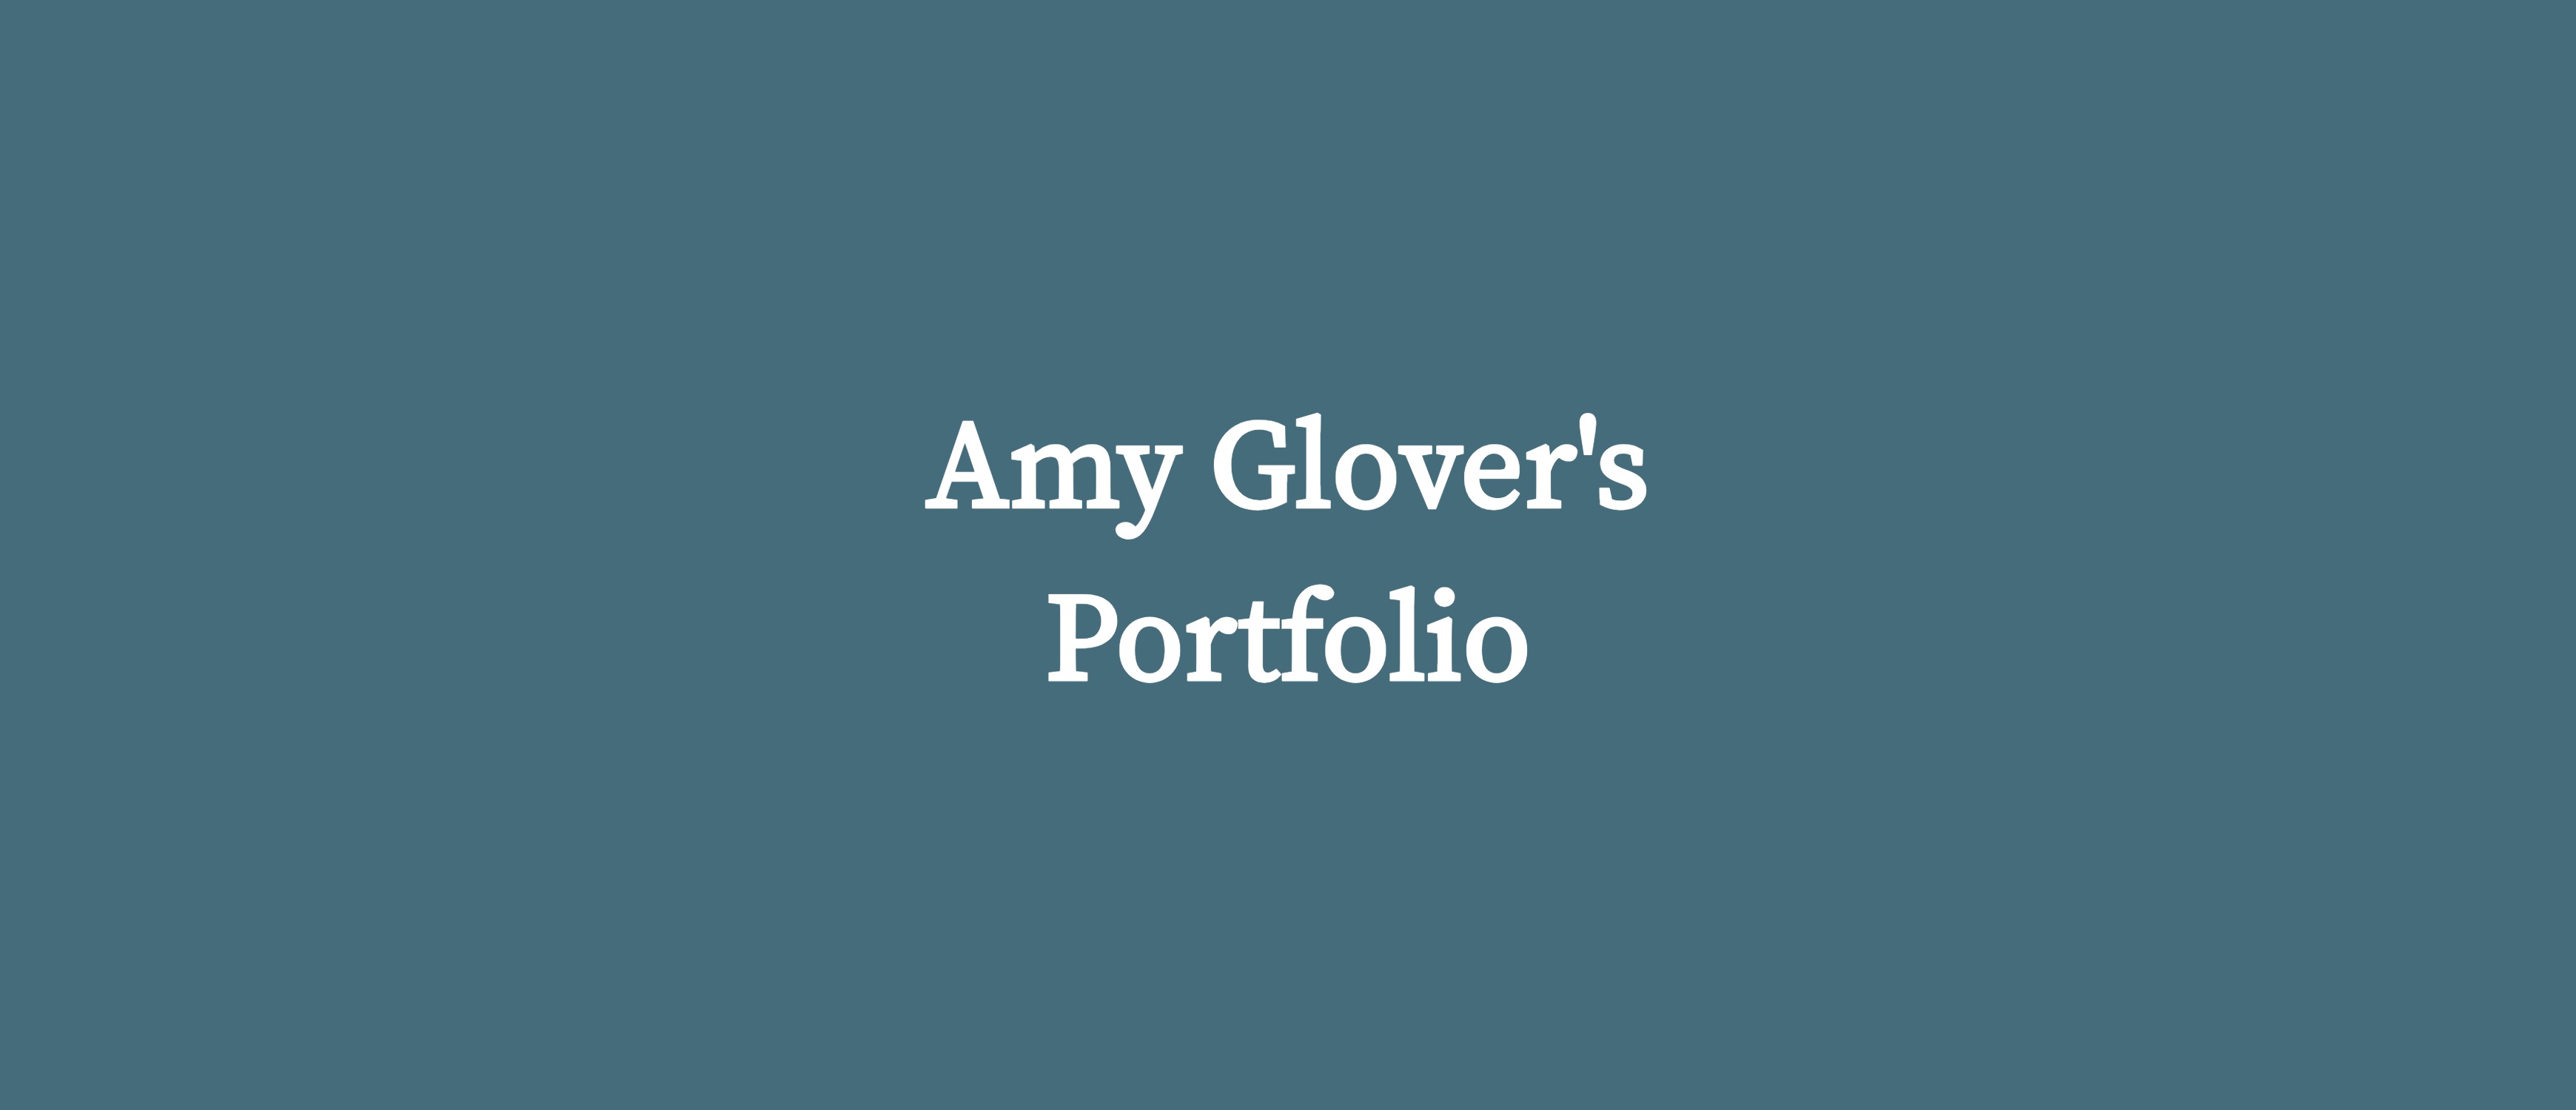 Amy Glover's
| ey guio)ile